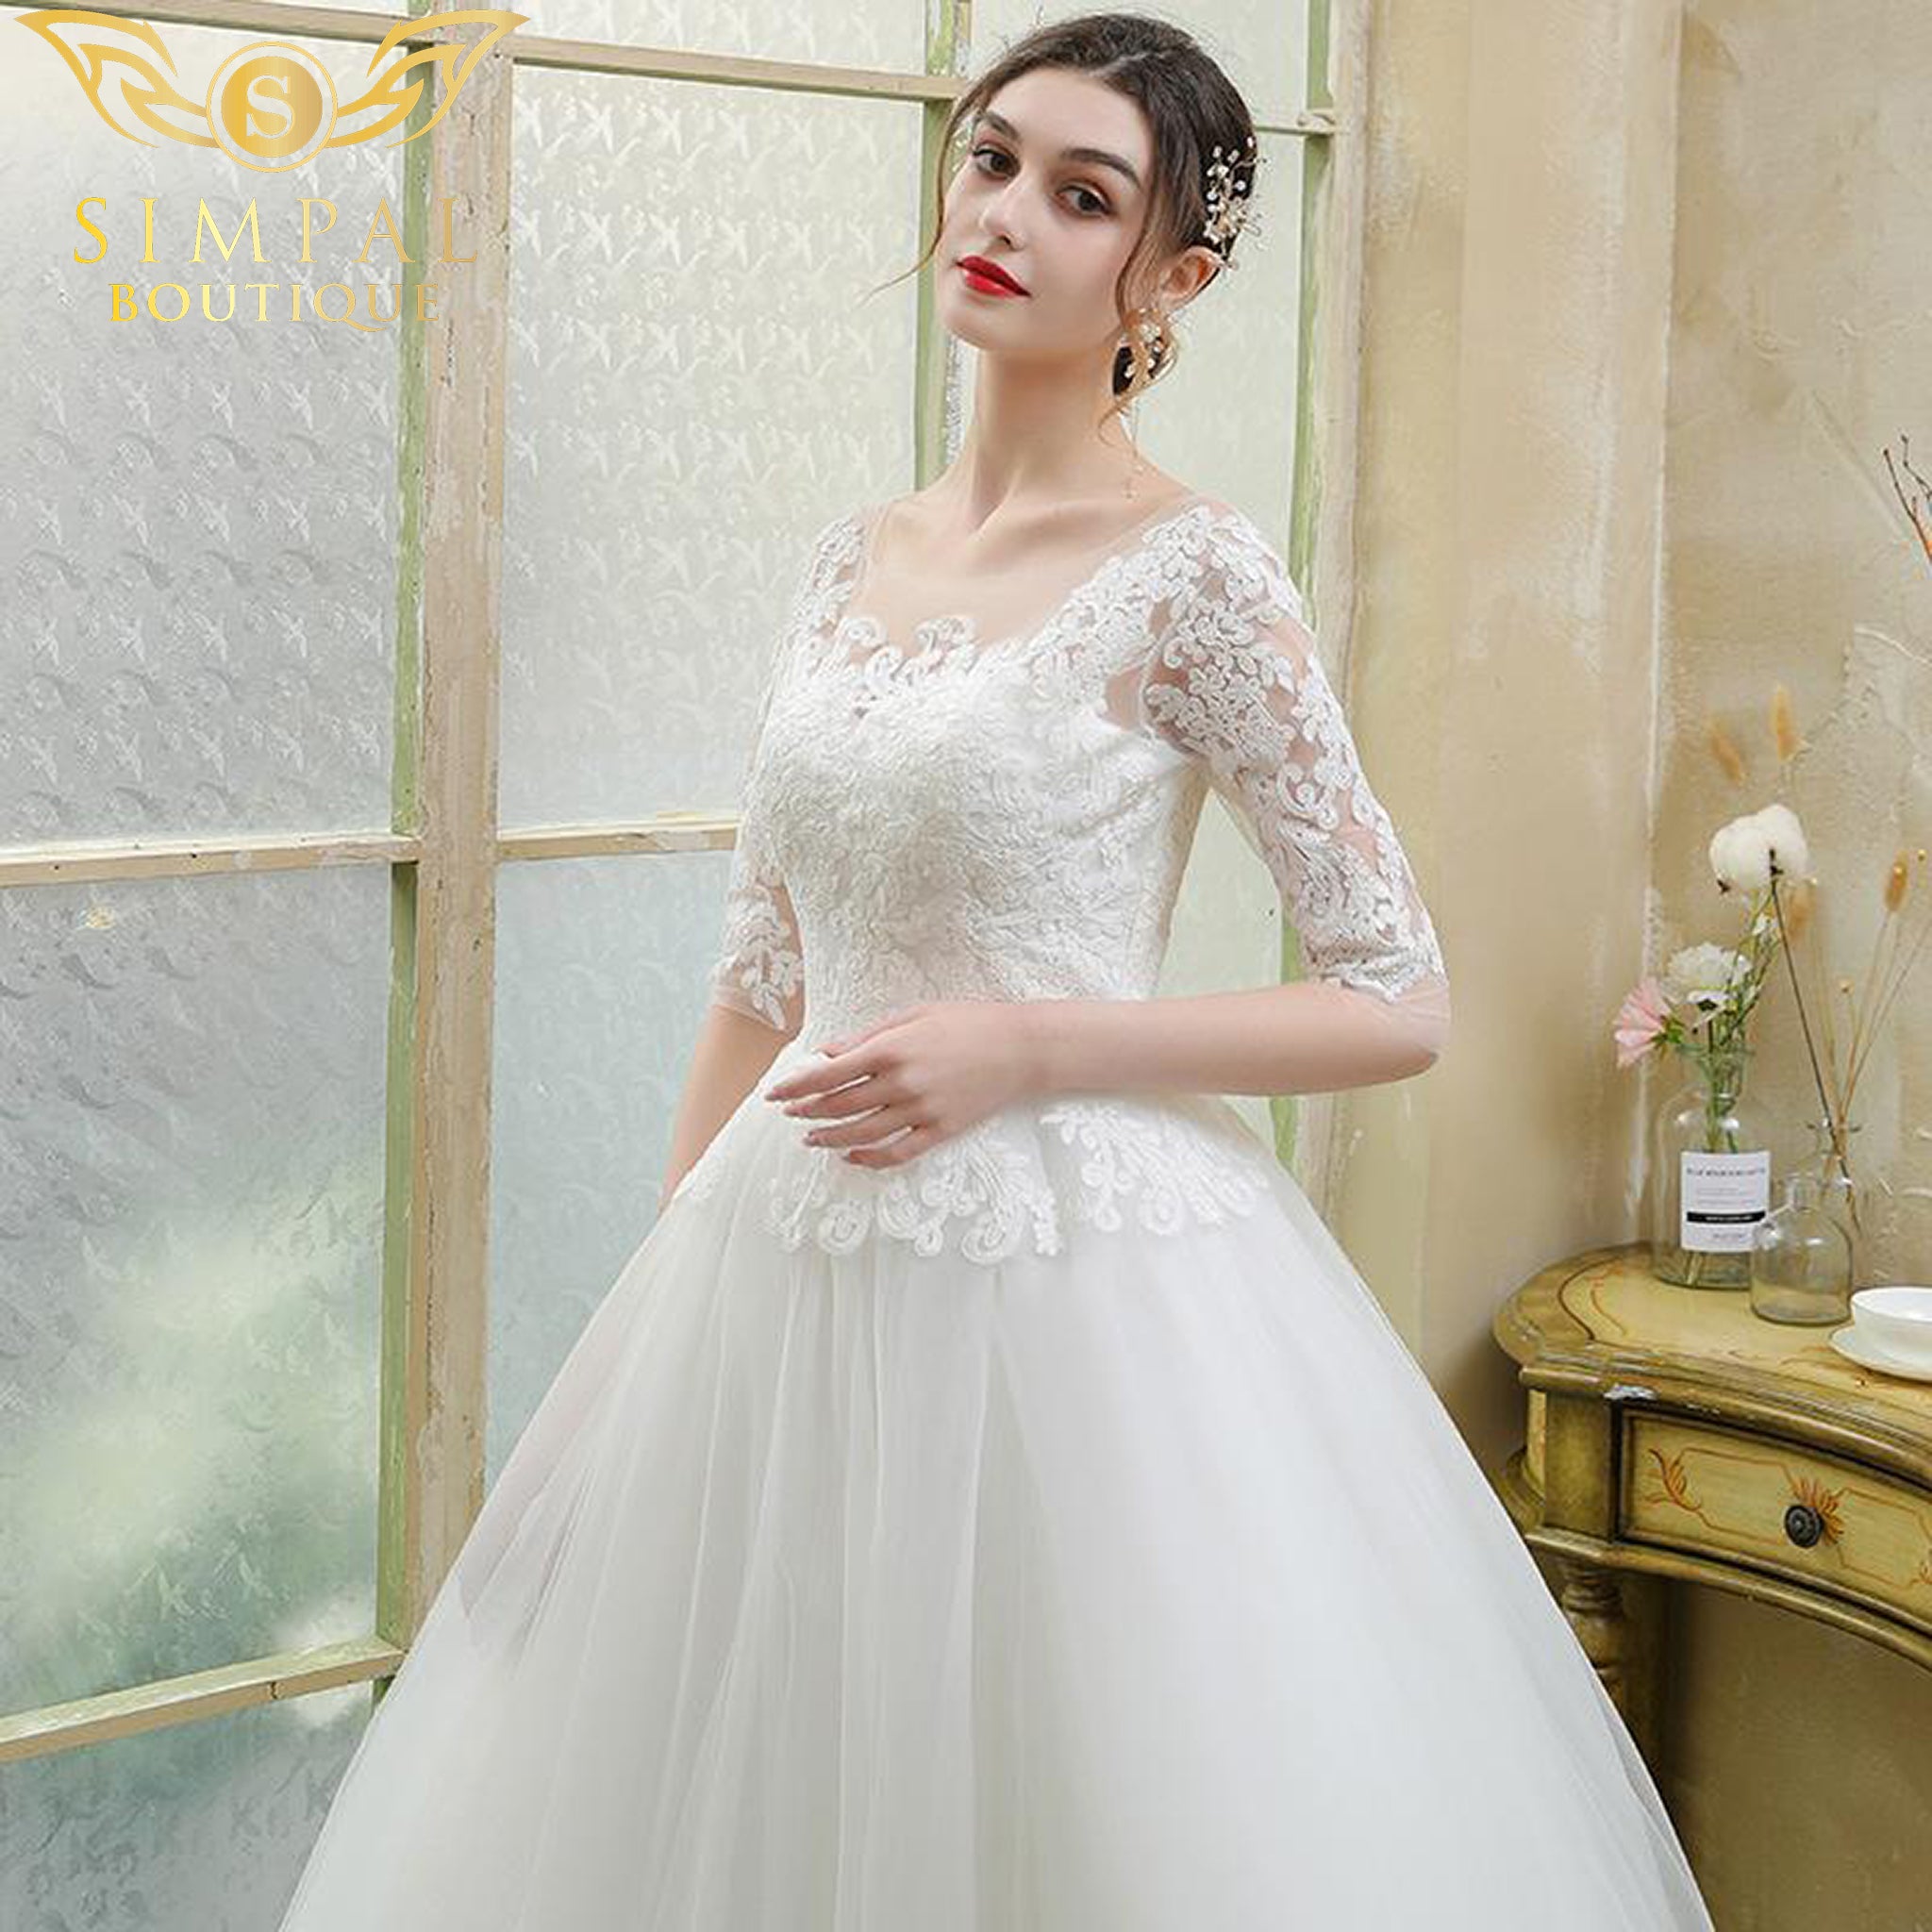 In Store Brides longsleeved forest lace wedding dress